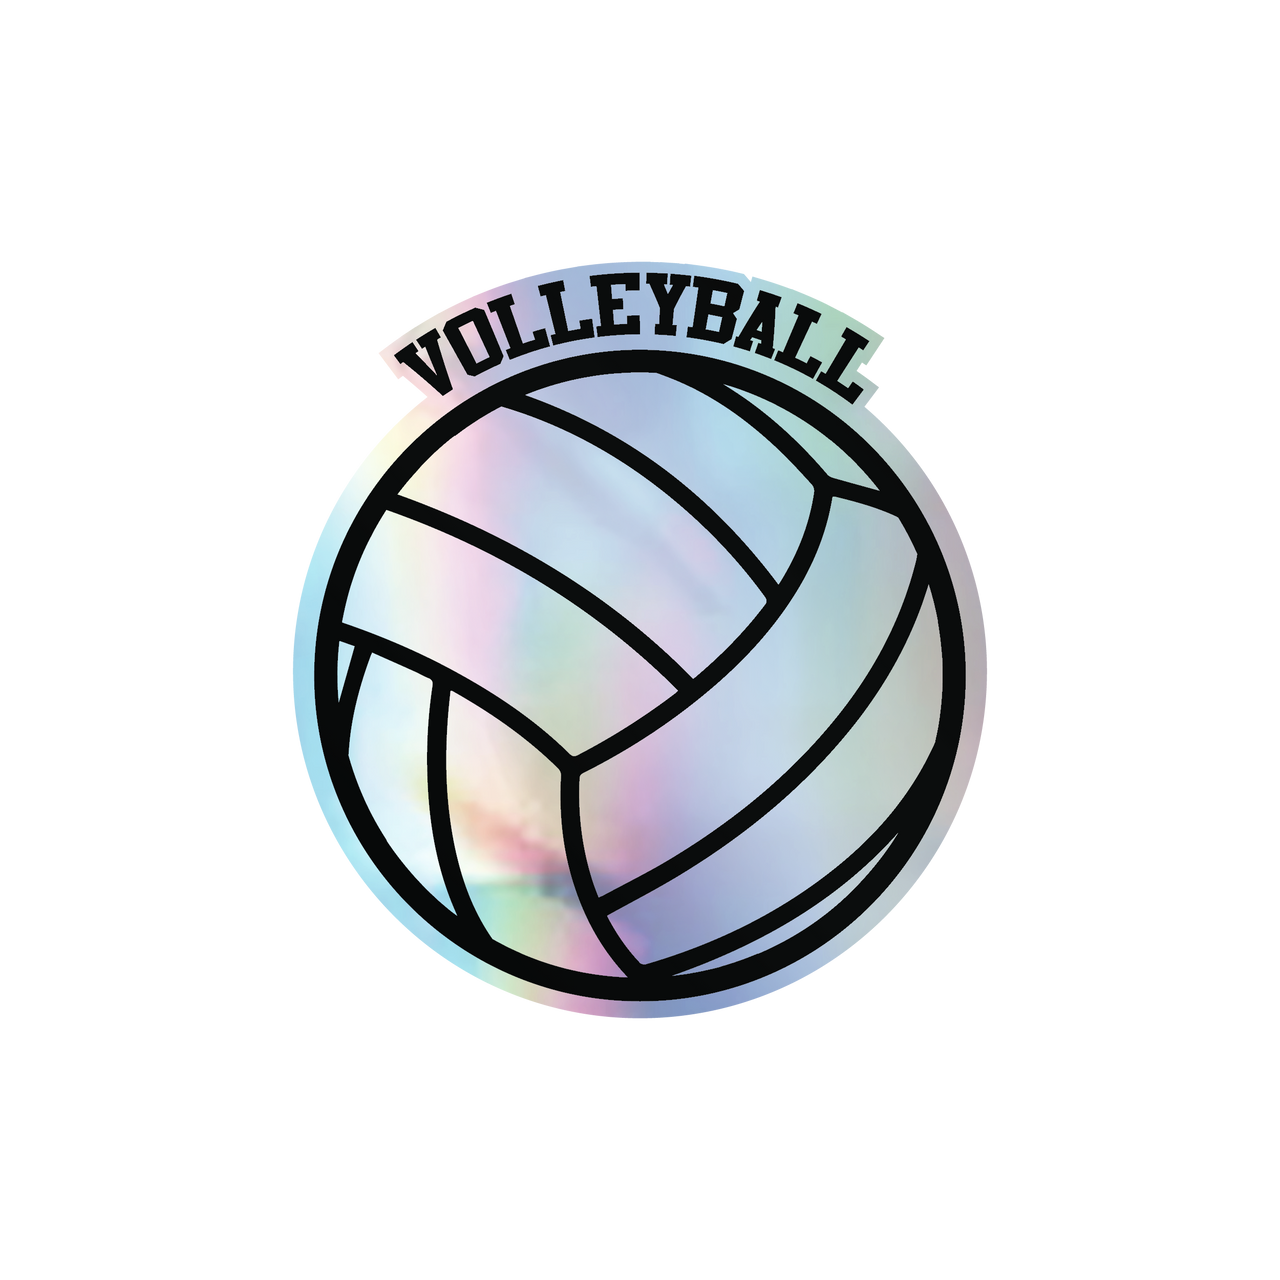 Volleyball Saque Sticker by Vôlei for iOS & Android